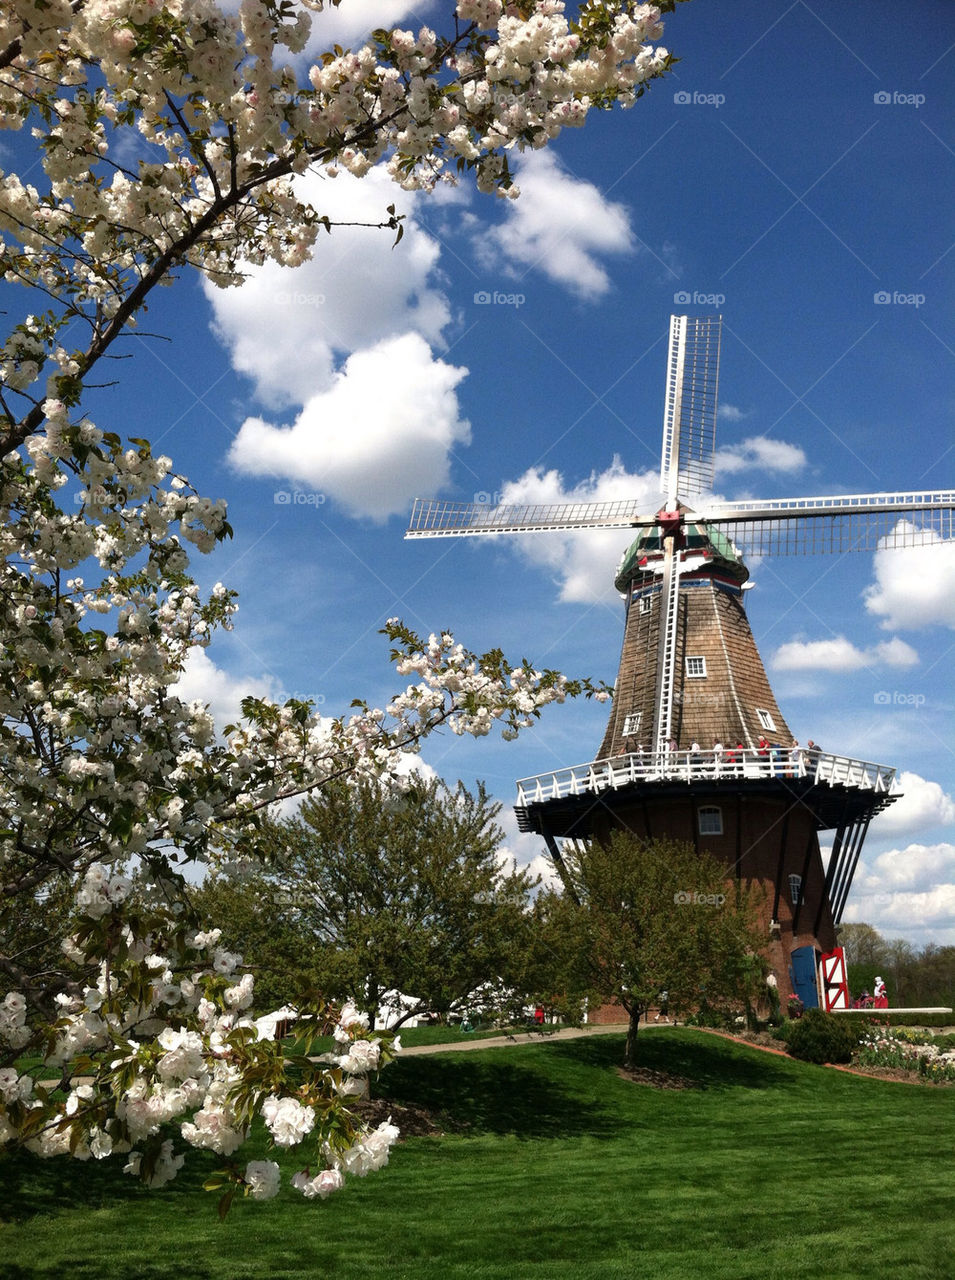 Windmill and cherry blossoms in springtime.